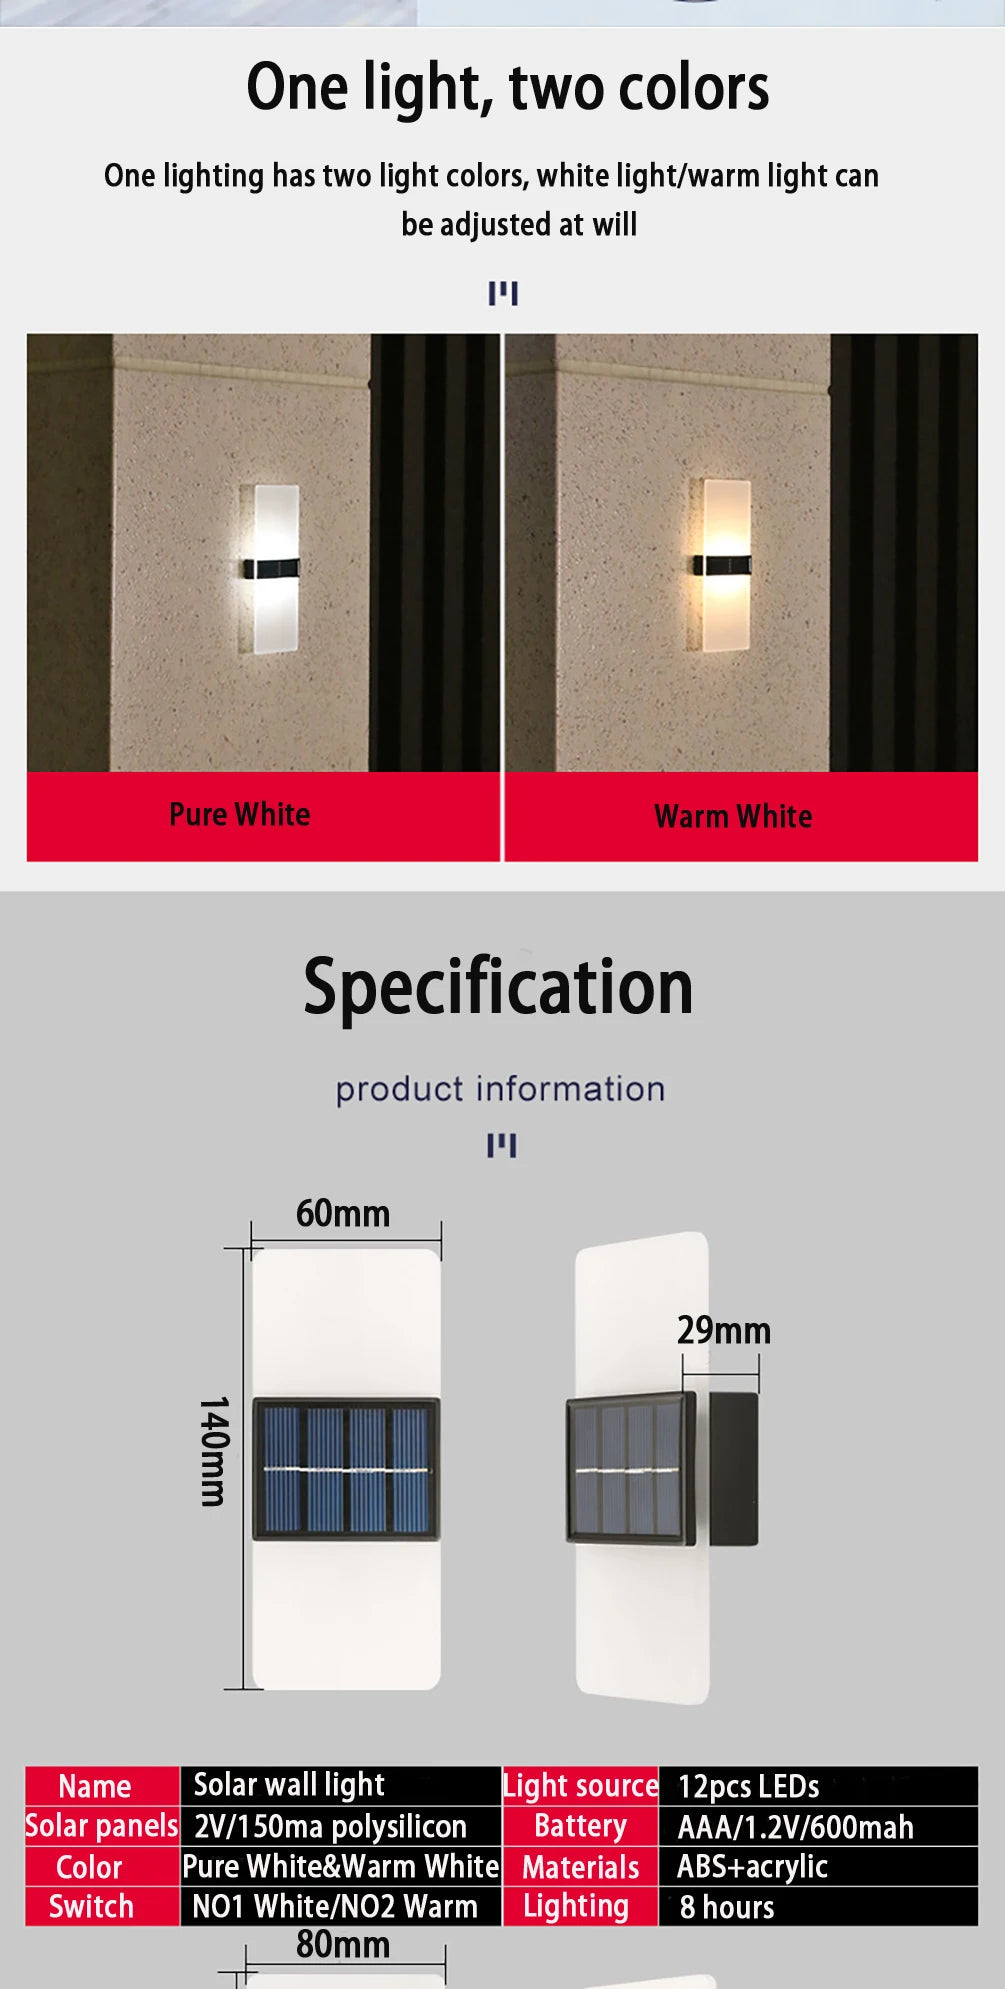 LED Solar Wall Light, Solar wall light with adjustable white/warm settings and long-lasting battery-powered illumination.